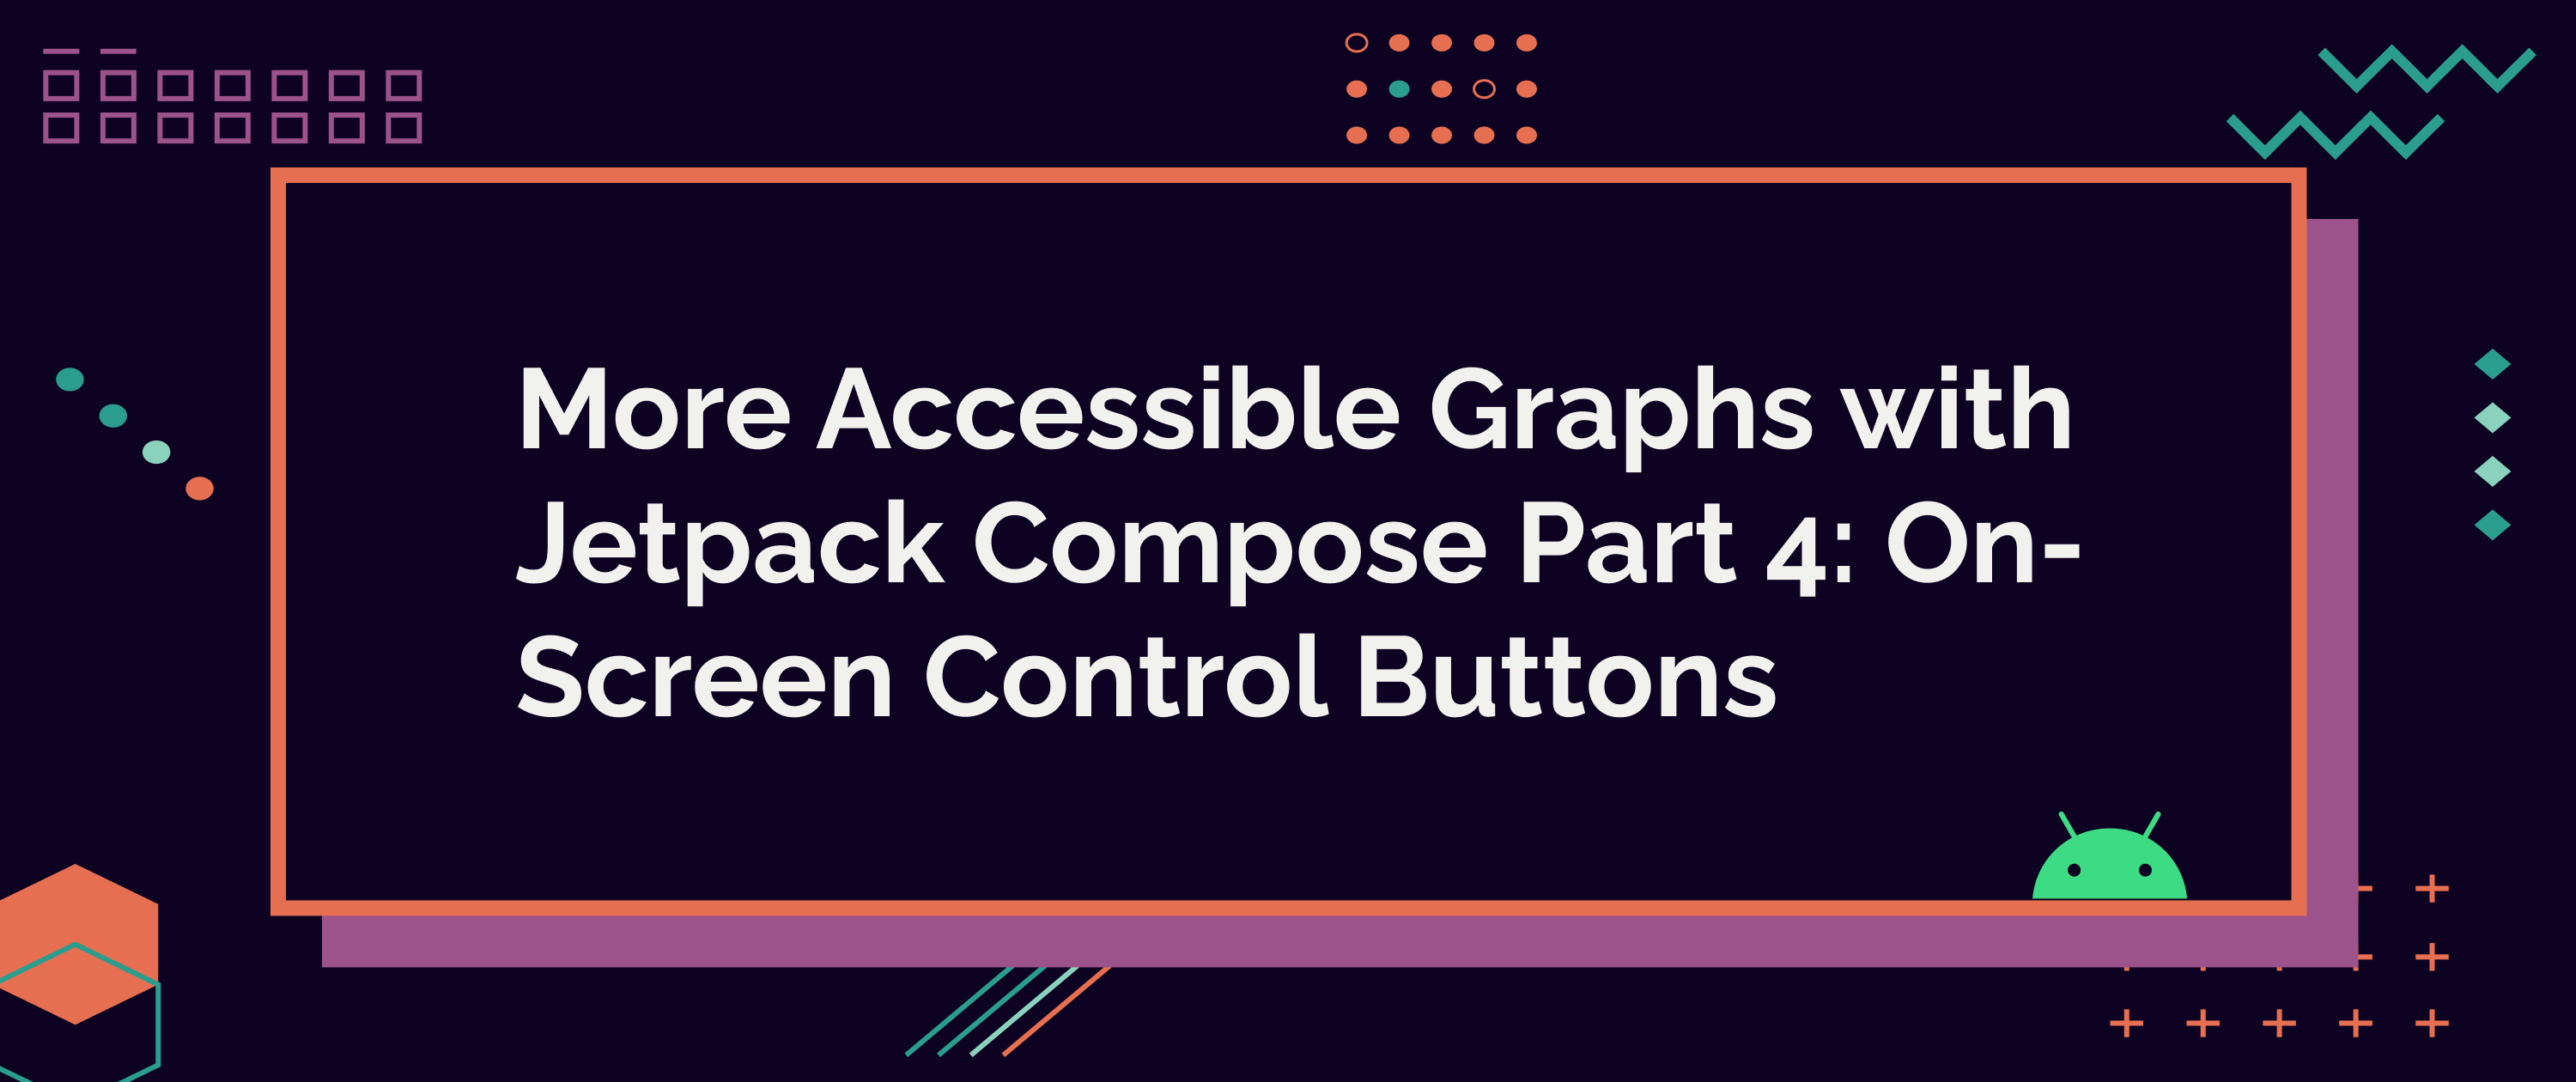 More Accessible Graphs with Jetpack Compose Part 4: On Screen Control Buttons